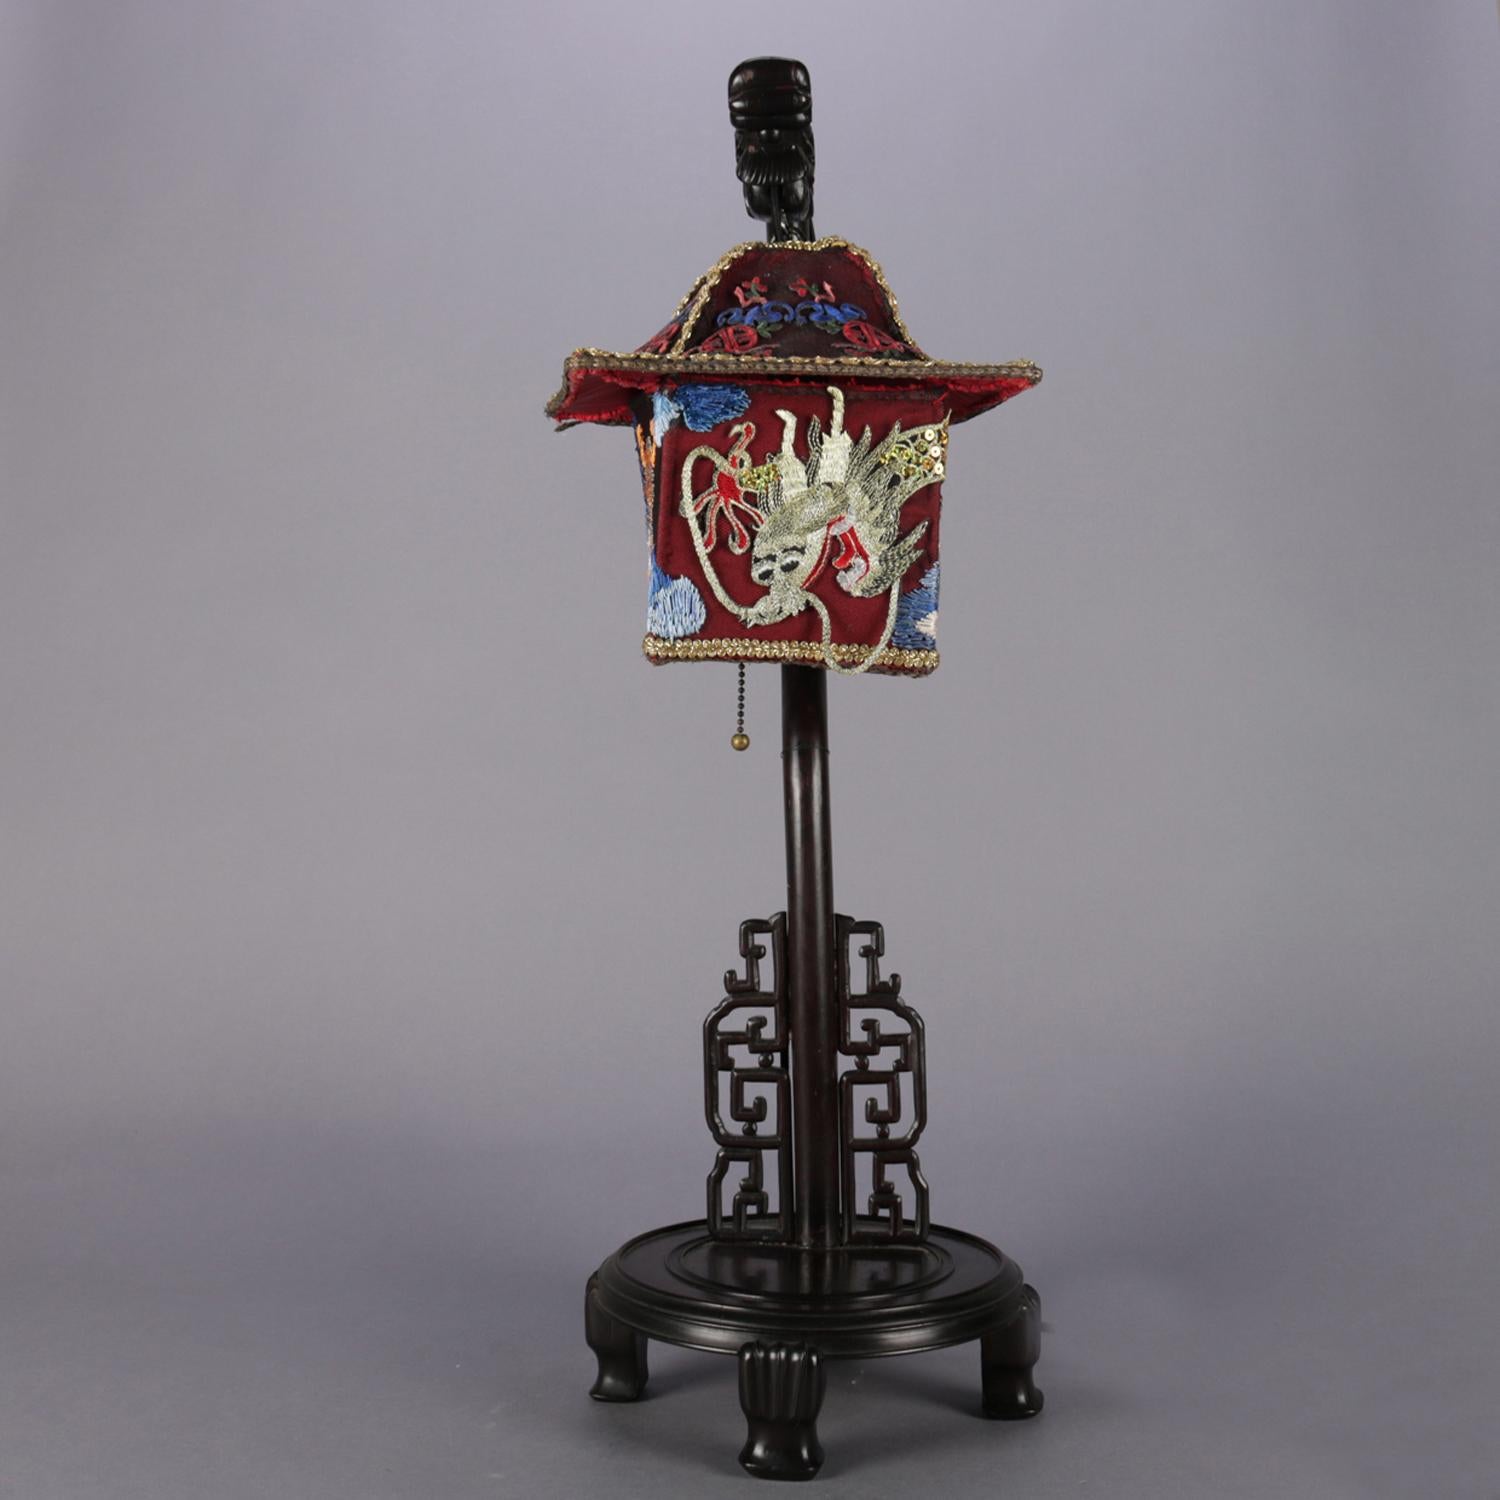 Chinese figural desk lamp features carved hardwood base in dragon form with pagoda form hanging shade heavily embroidered with dragon and gold decoration, working condition, 20th century.

Measures - 28